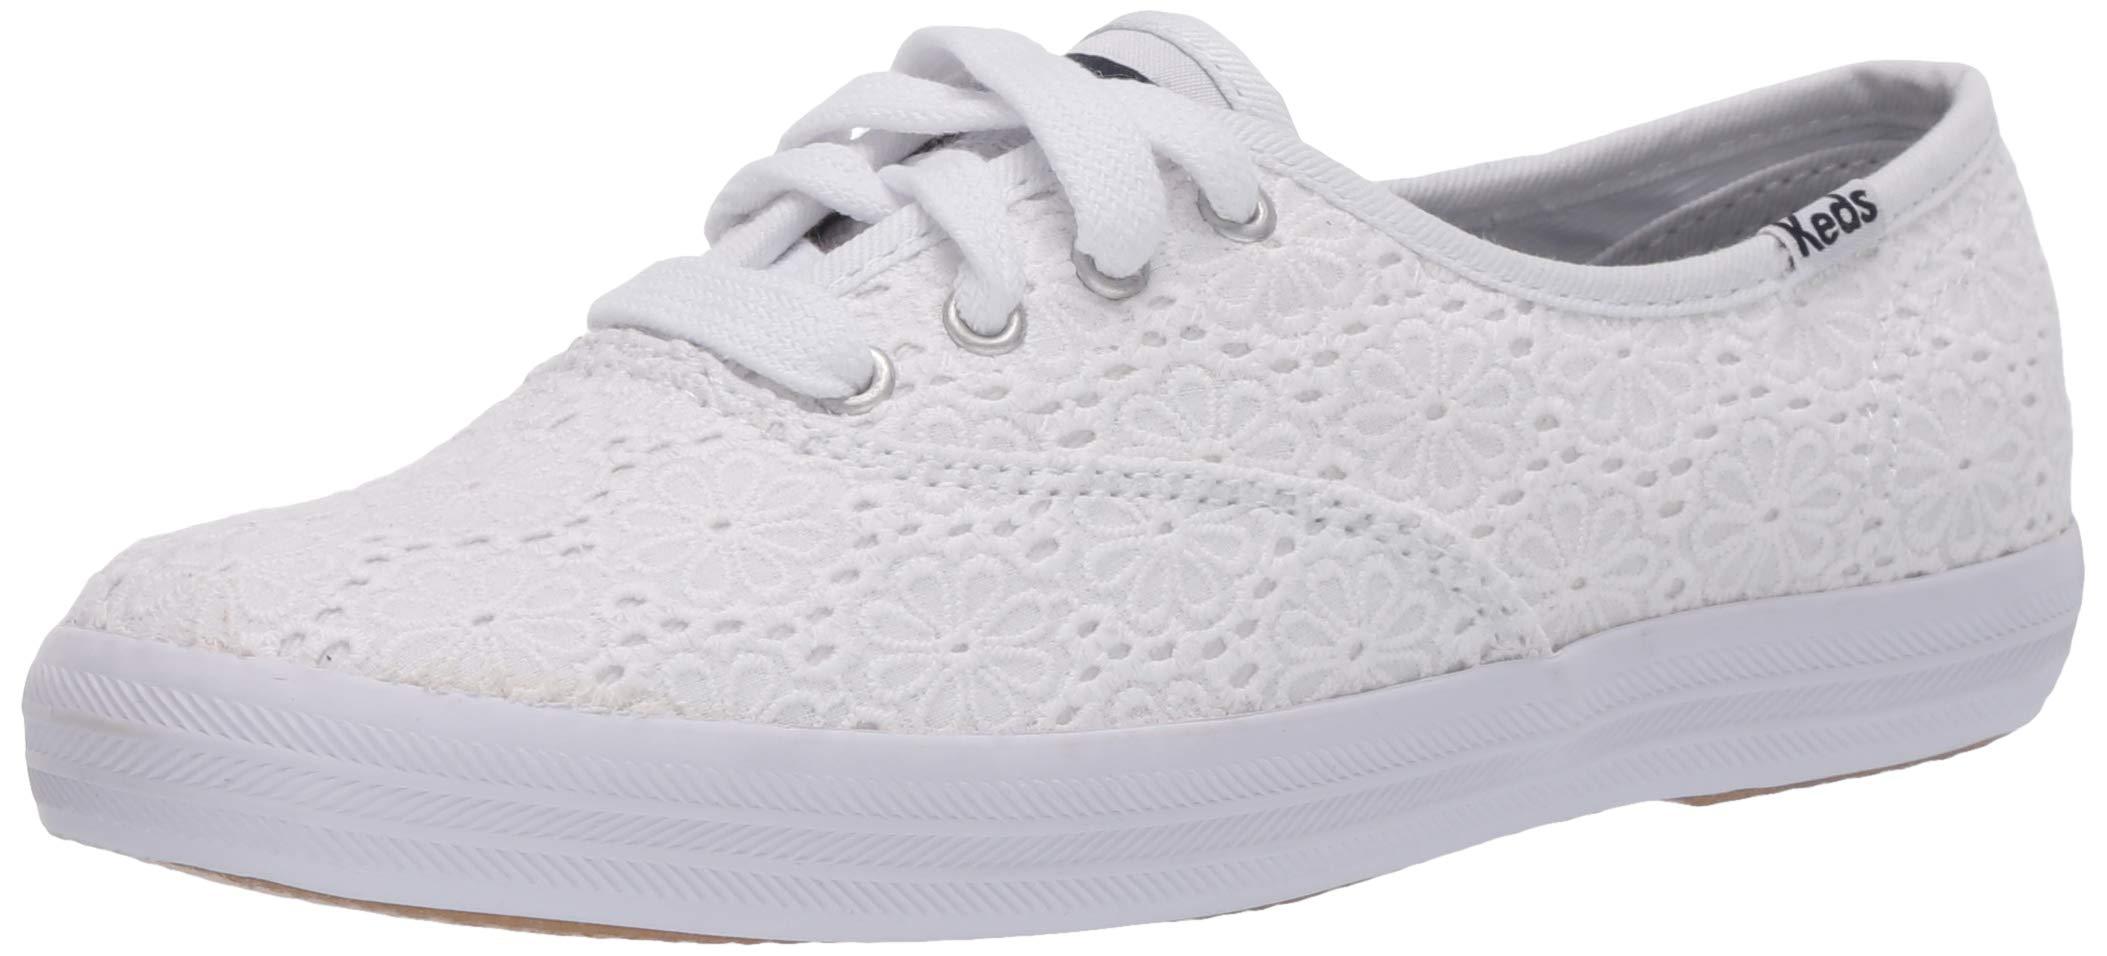 Keds Canvas Champion Daisy Eyelet Sneaker in White - Save 43% | Lyst